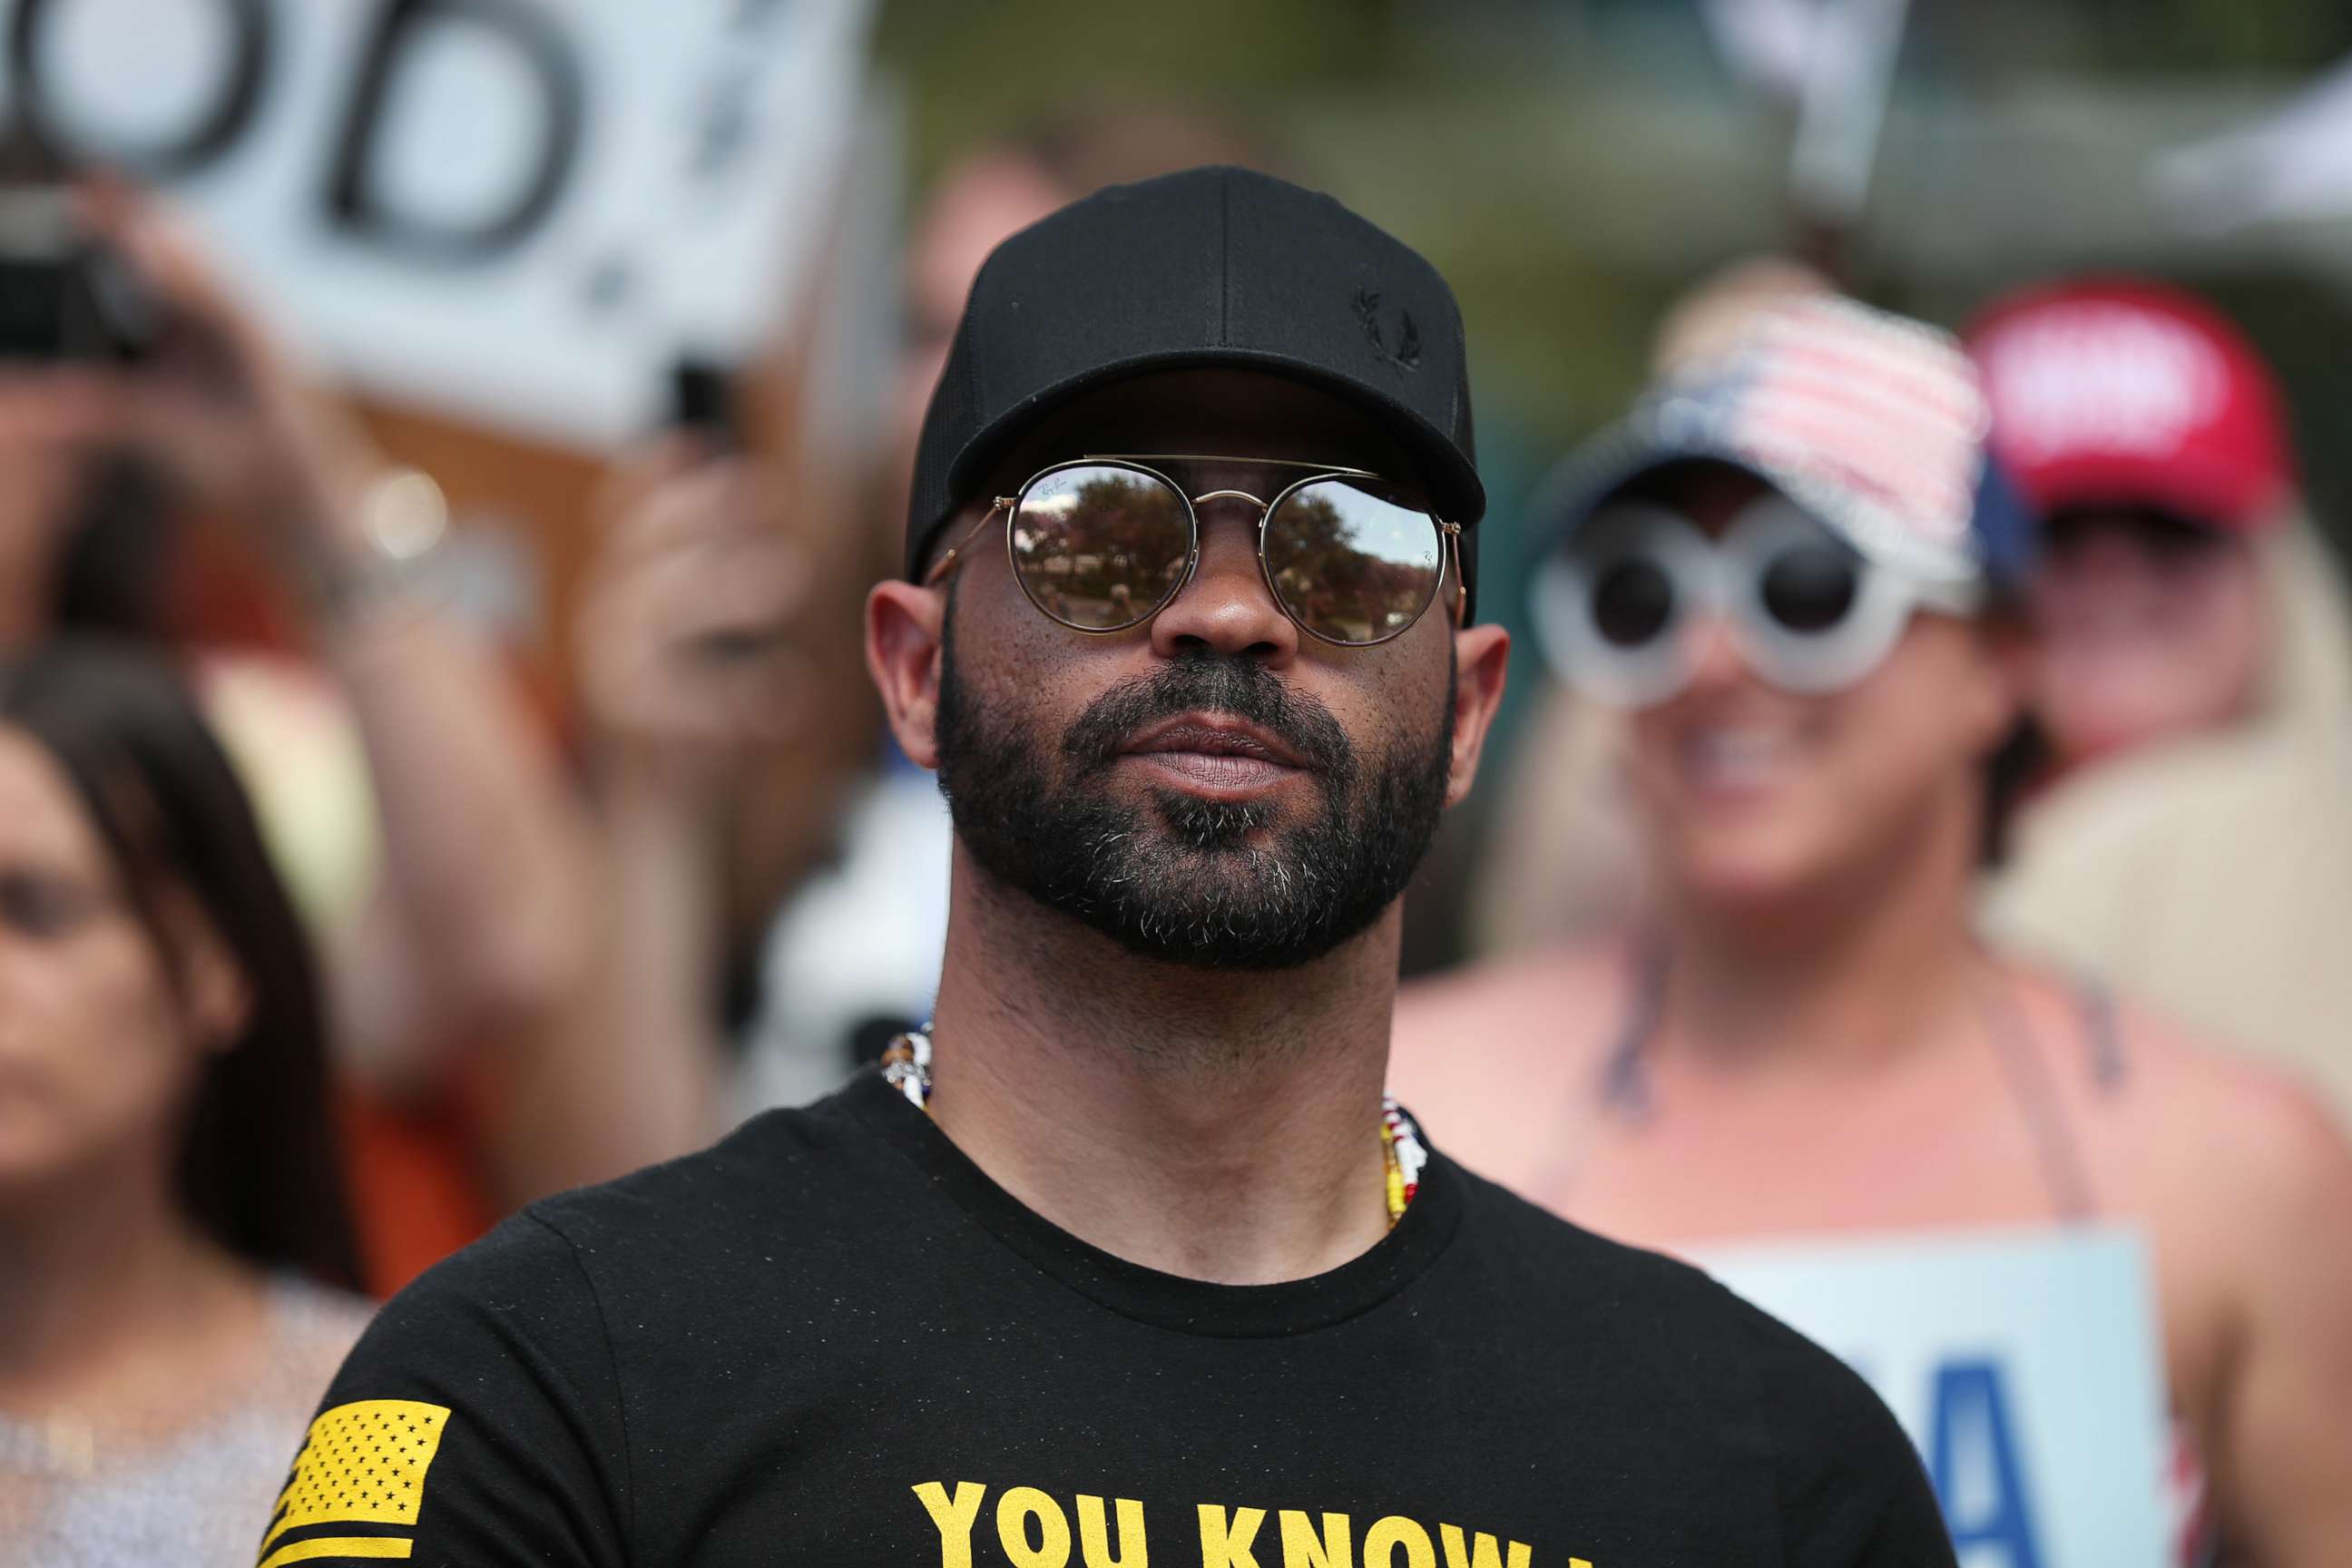 PHOTO: Enrique Tarrio, leader of the Proud Boys, stands outside of the Hyatt Regency where the Conservative Political Action Conference is being held, Feb. 27, 2021, in Orlando, Fla.